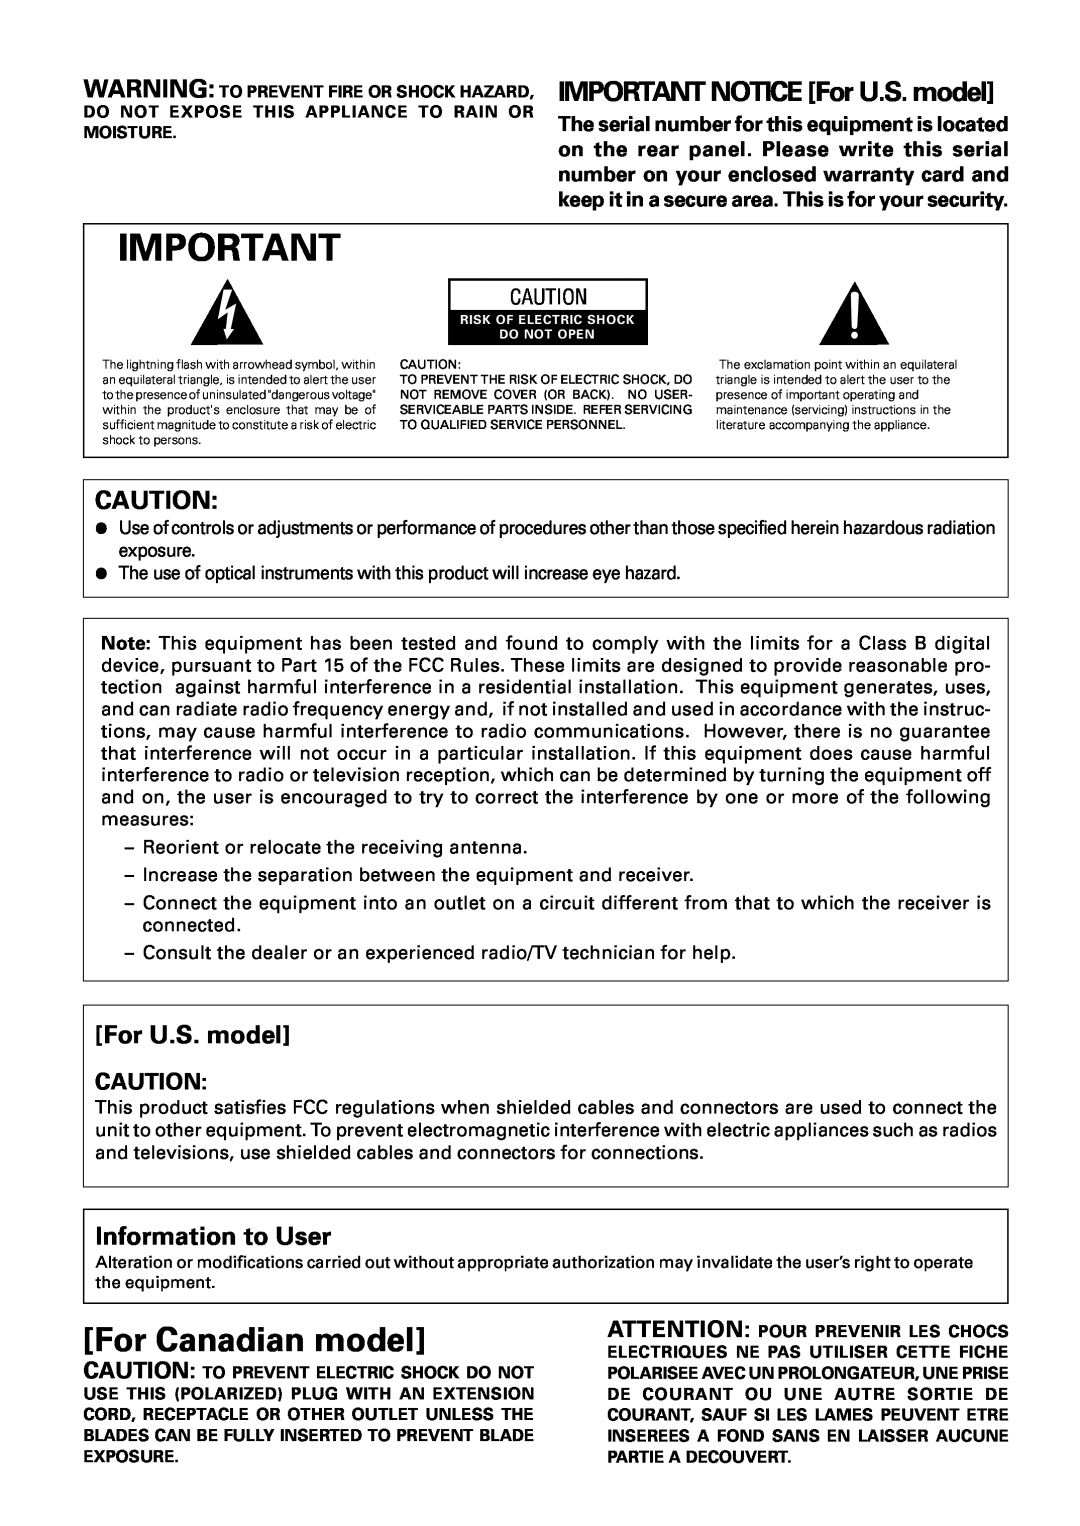 Pioneer PDR-W37 manual For Canadian model, IMPORTANT NOTICE For U.S. model, Information to User 